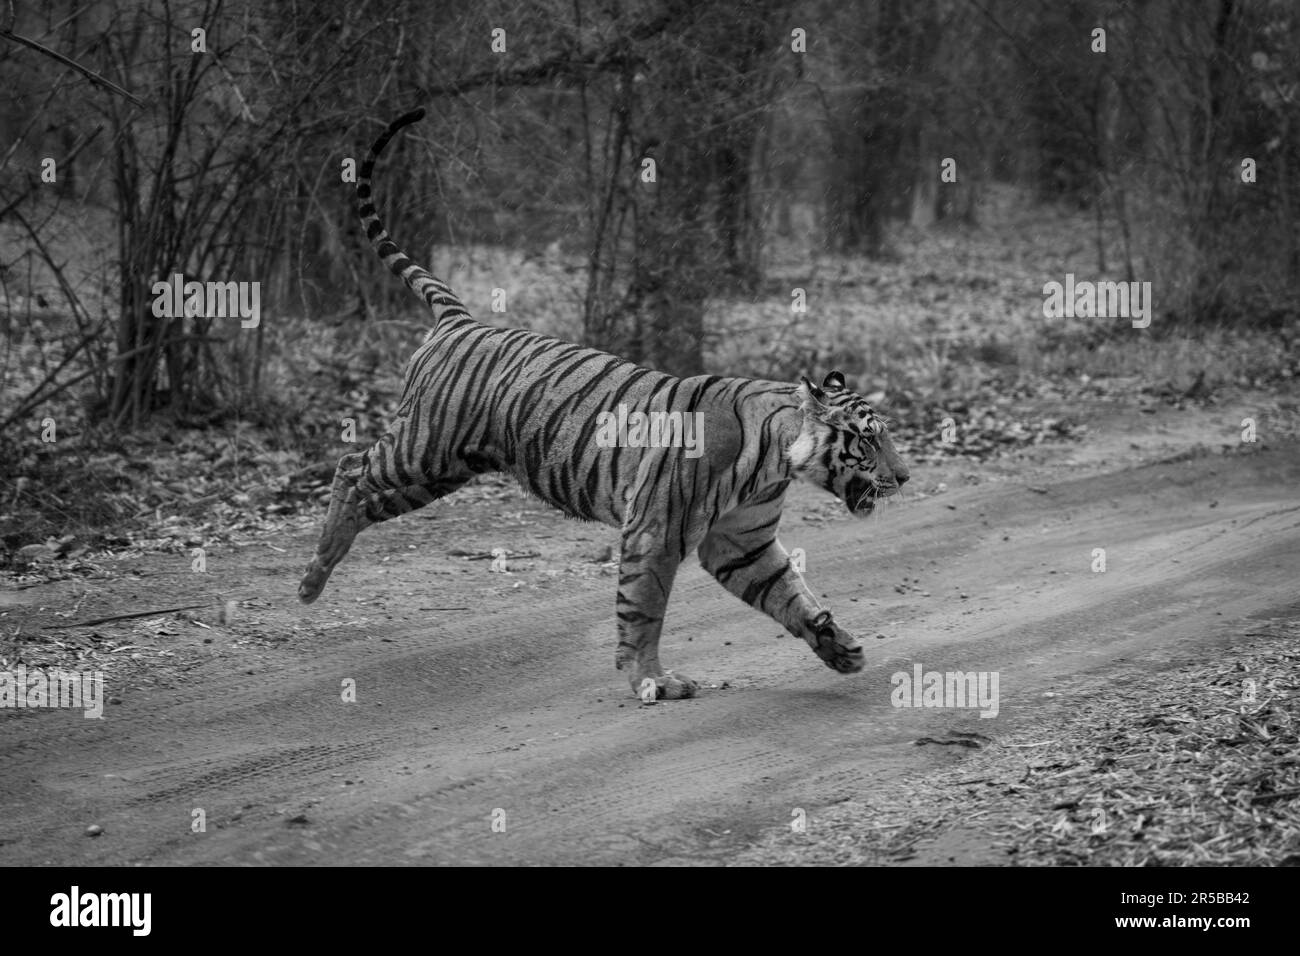 A male Bengal tiger races across a dirt track through the forest, chasing another male off his territory. He has orange and black stripes with white p Stock Photo